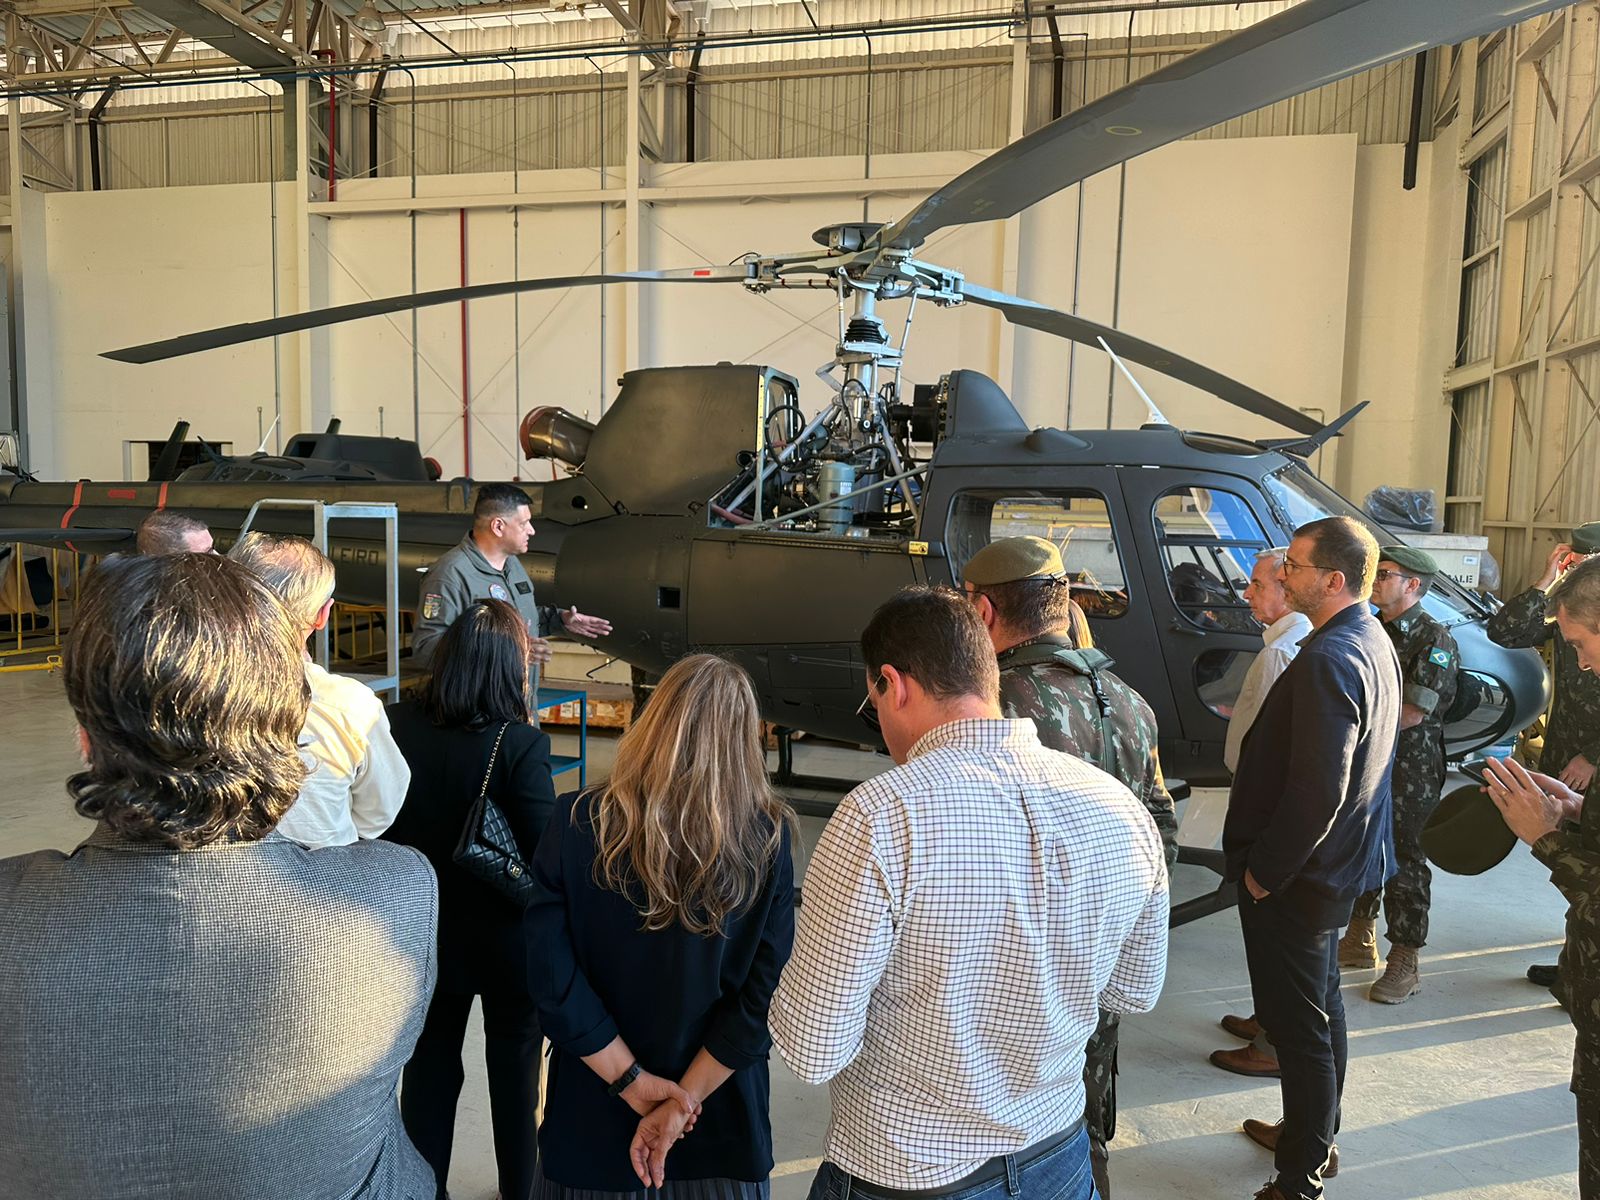 High-tech aircraft and systems are presented by the Brazilian Army Aviation in Taubaté